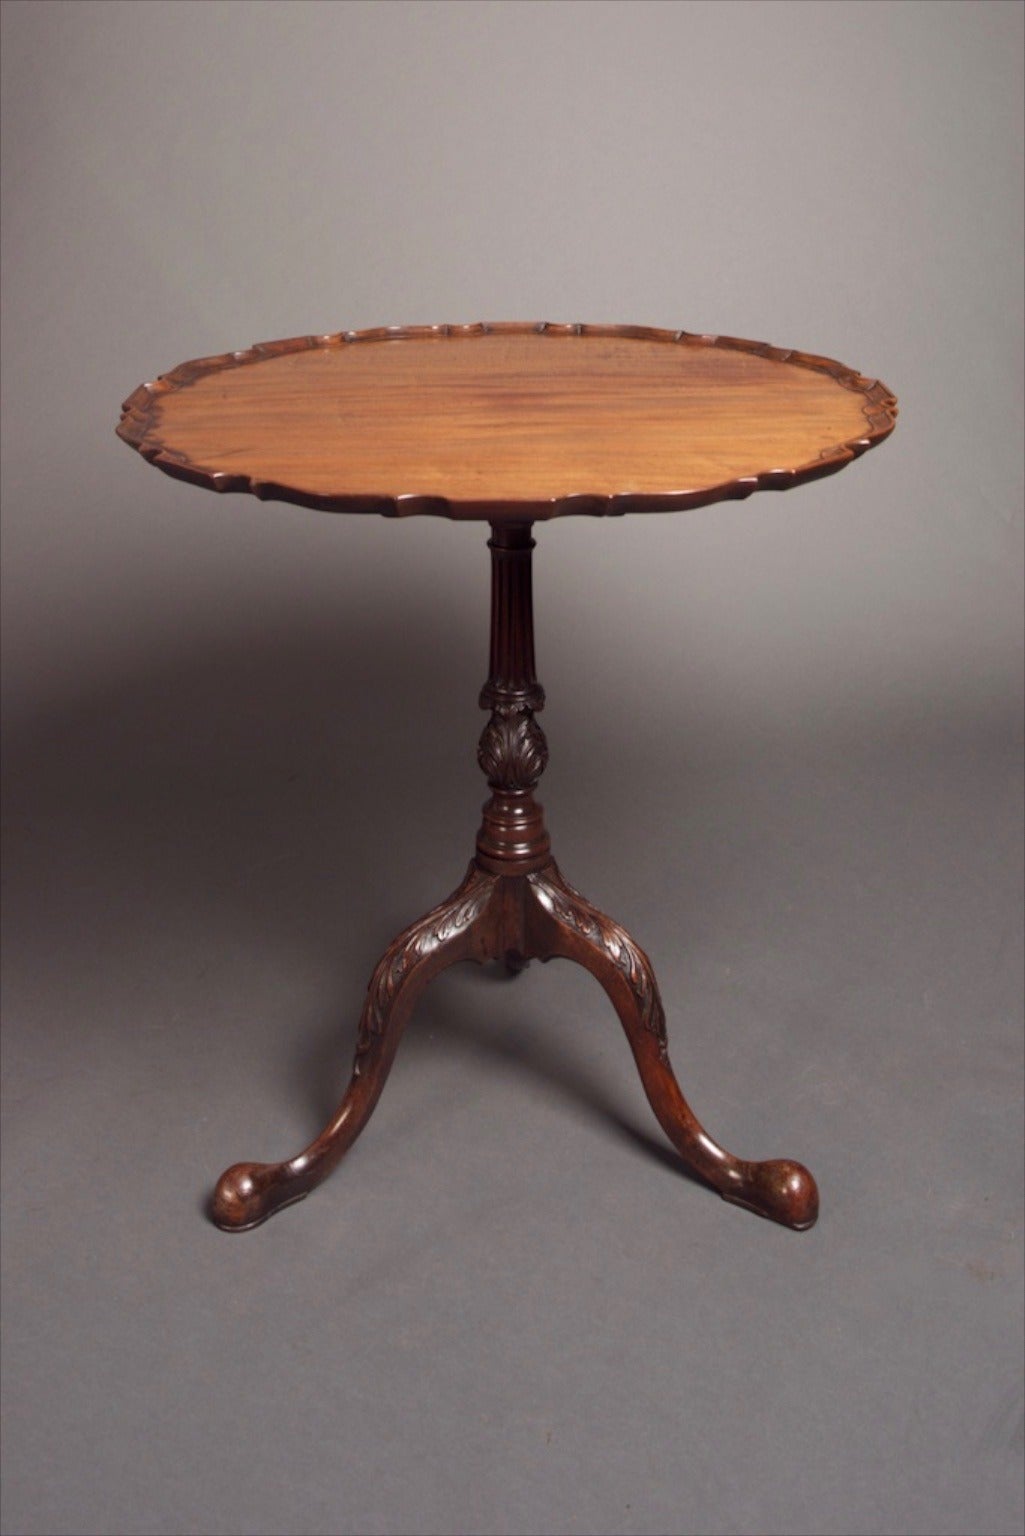 A George III tilt-top tea table, the top being of one single piece of Honduras mahogany. Having a piecrust & scalloped edge, the whole standing upon a fluted & turned column, tripod base with foliate carving to the knees. Original polish showing a